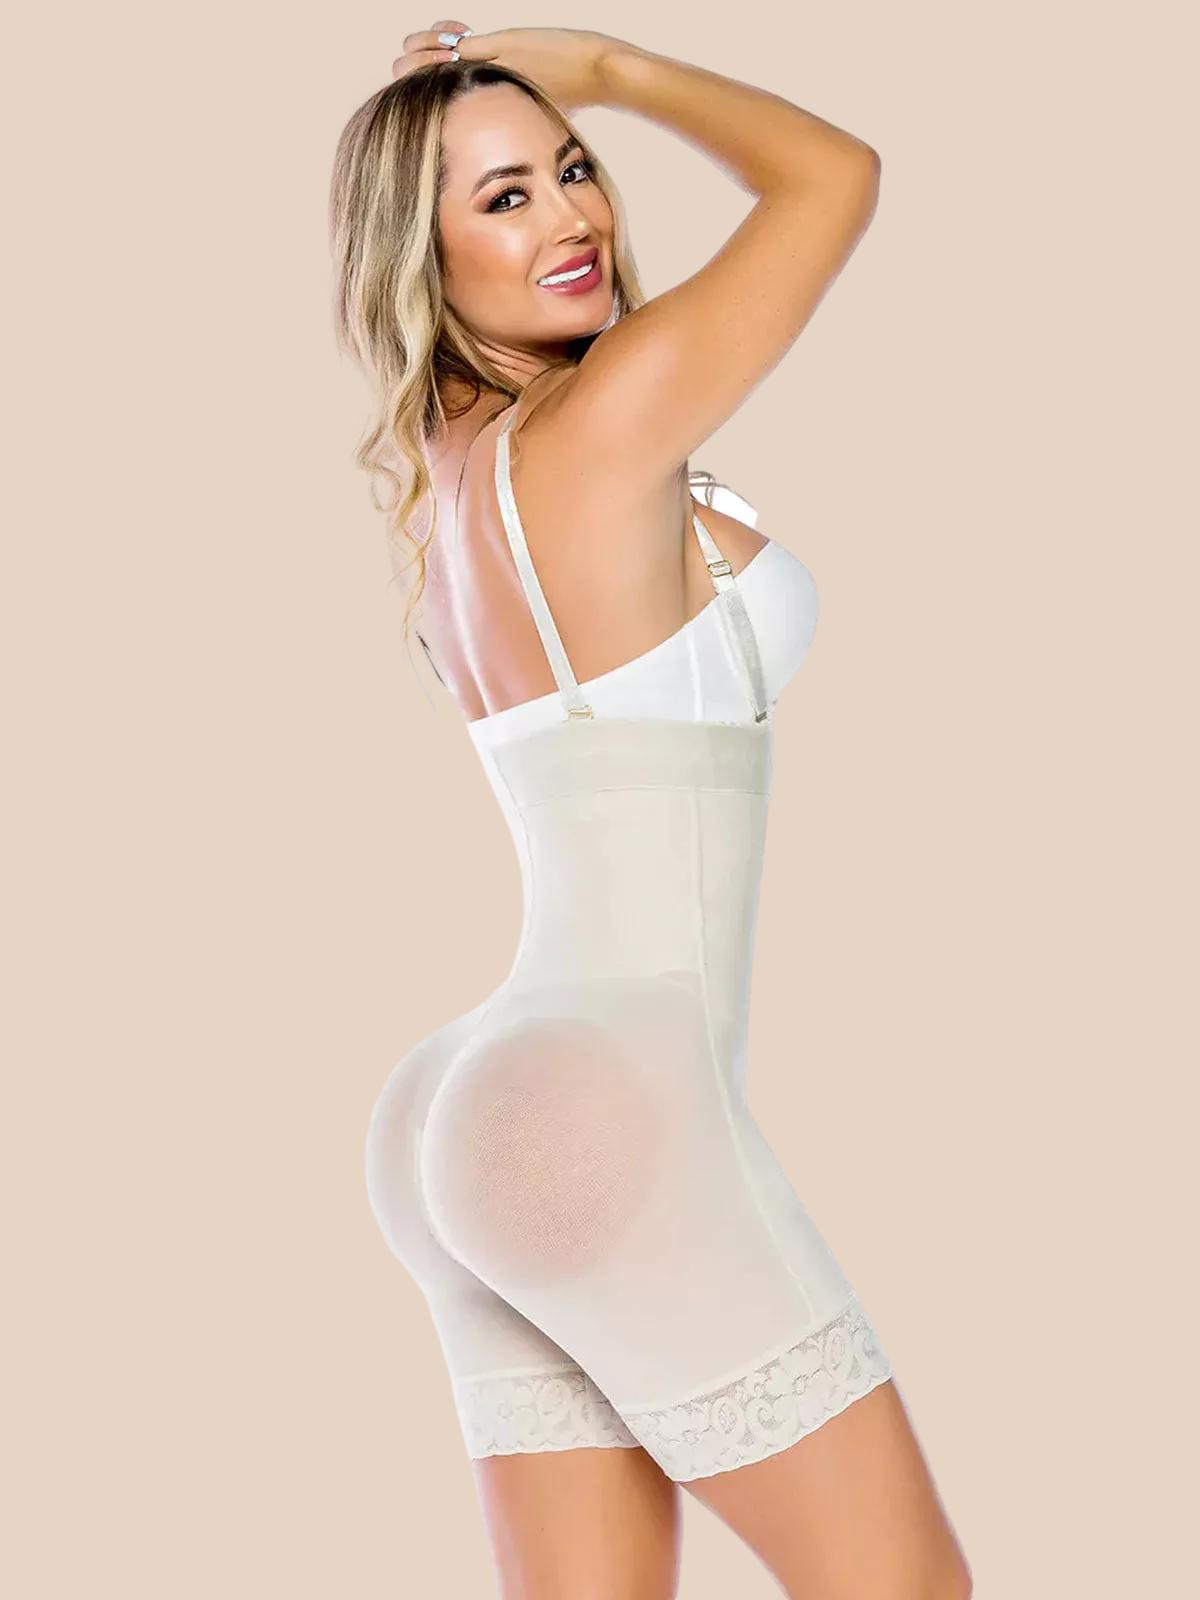 Underwear Fajas Colombianas Reductoras y Moldeadoras Shapewear for women  Seamless Silicone Band Liposuccion Mejoria Strapless Buttocks Lift  High-Waisted Boxer 